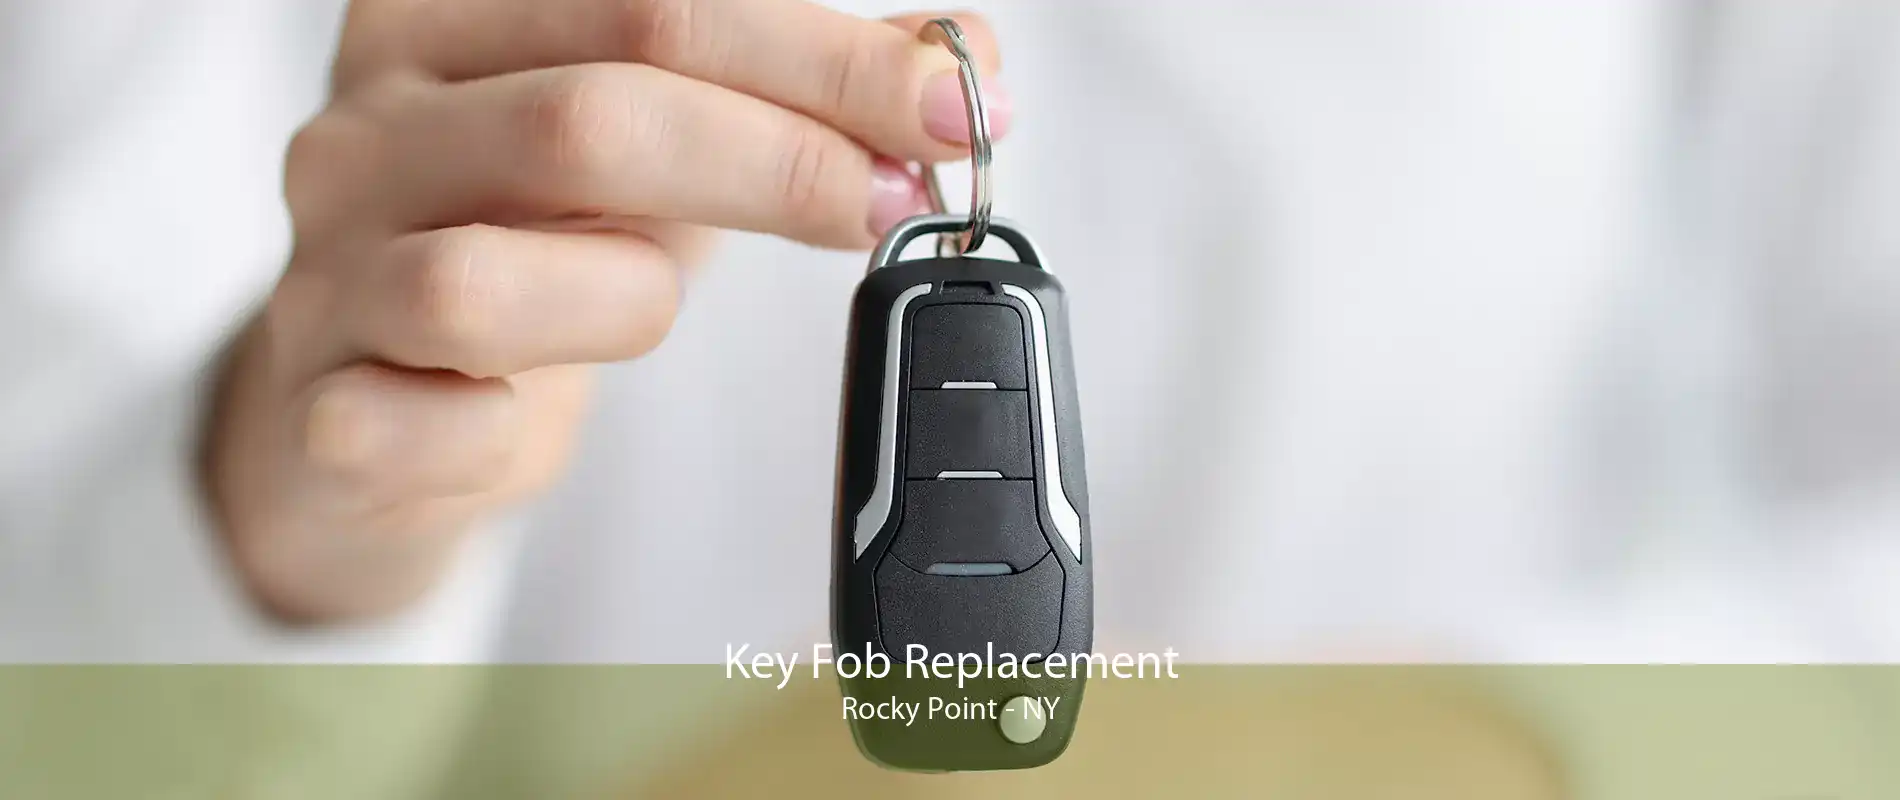 Key Fob Replacement Rocky Point - NY